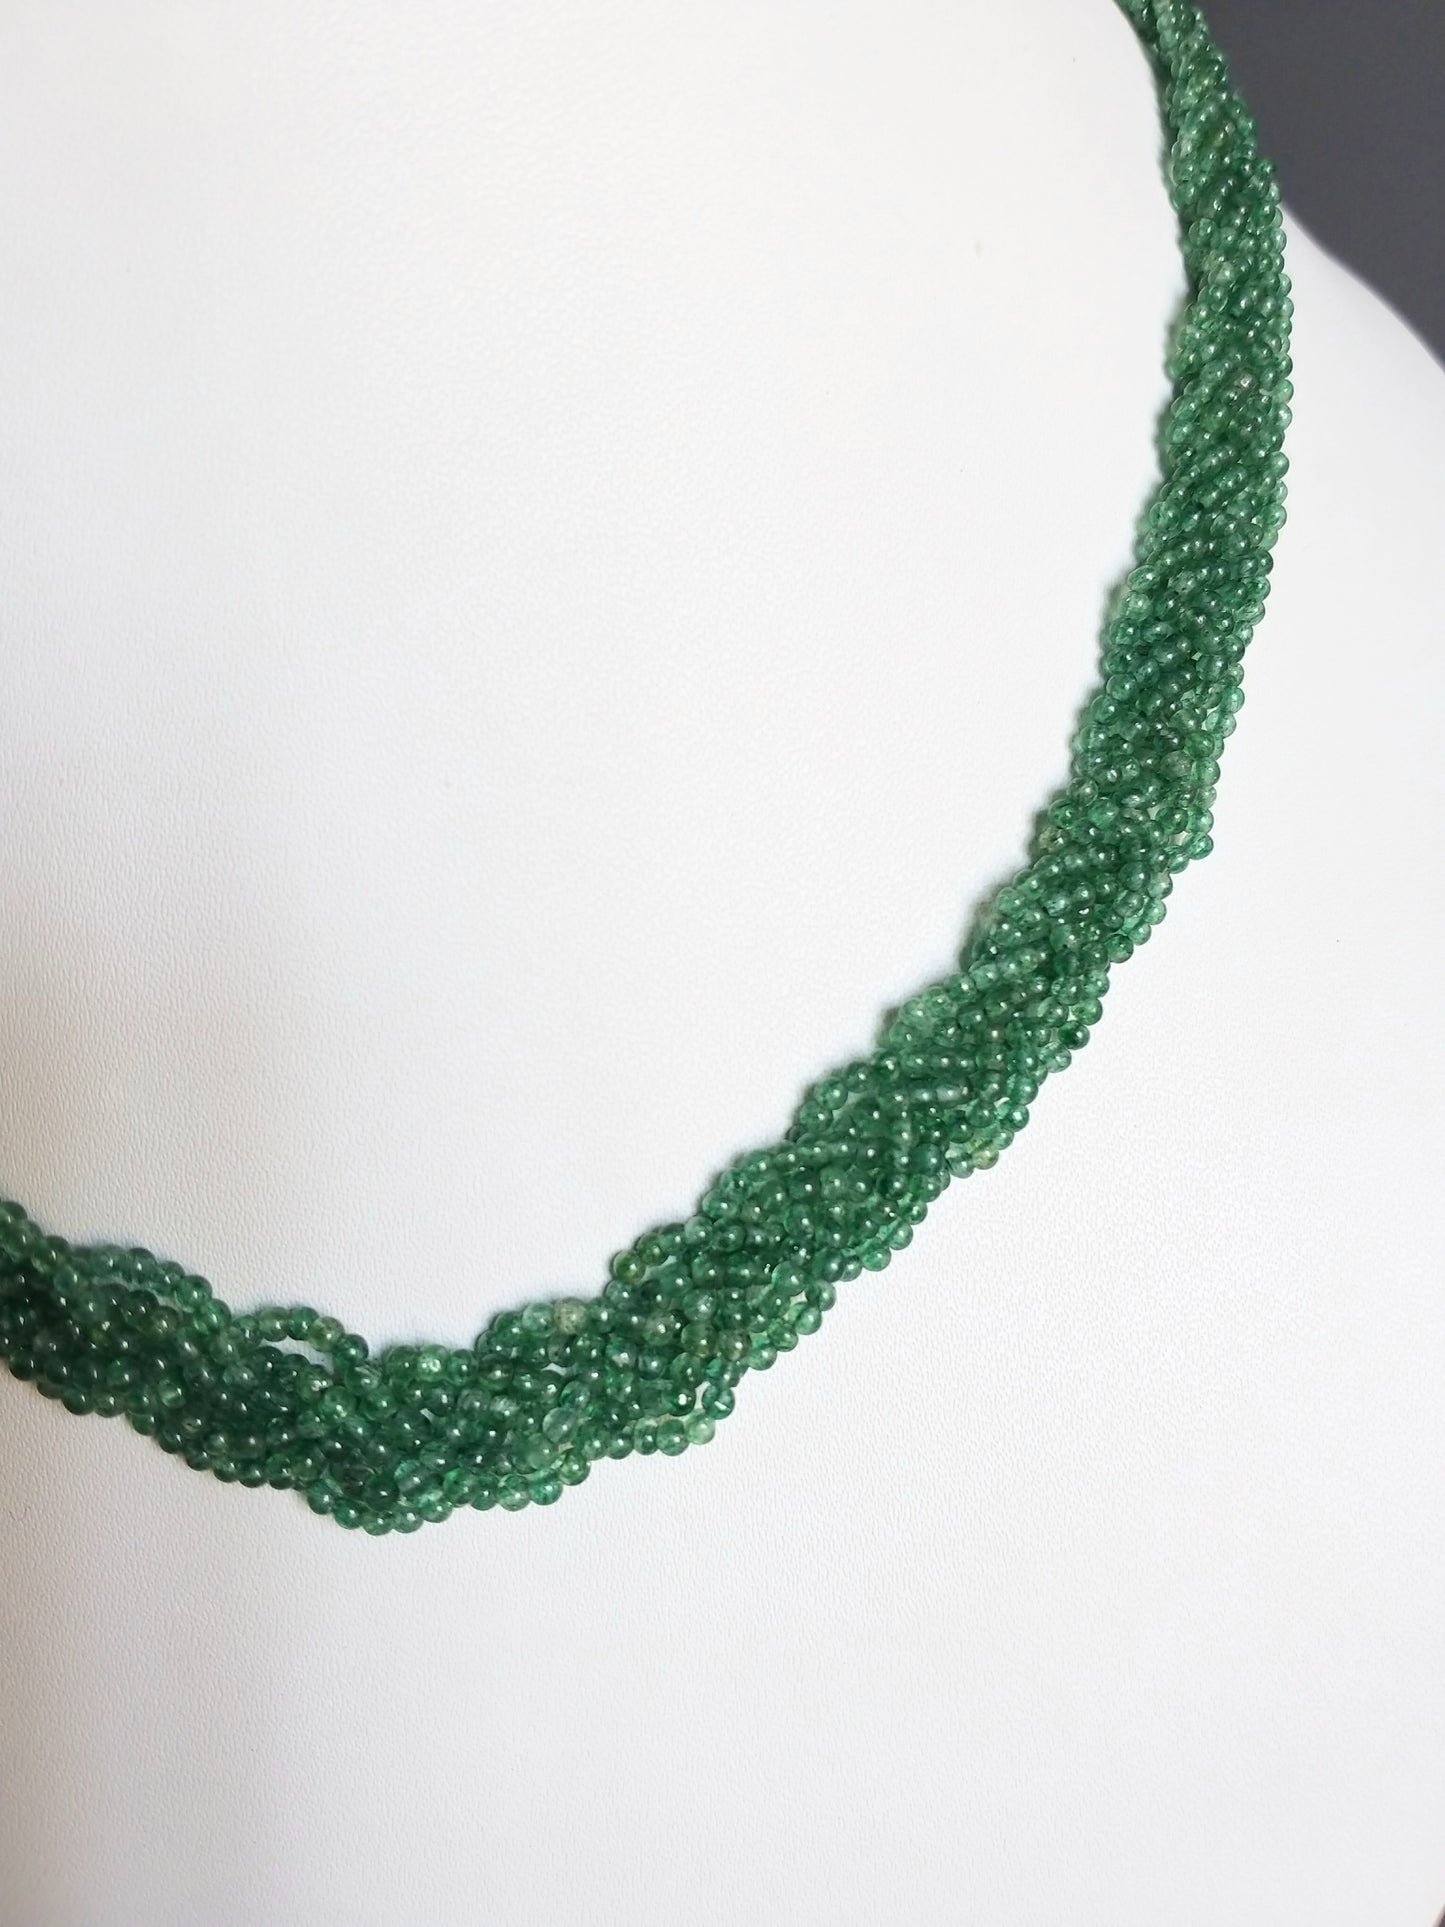 Natural Green Onyx Beads Necklace, Choker Necklace